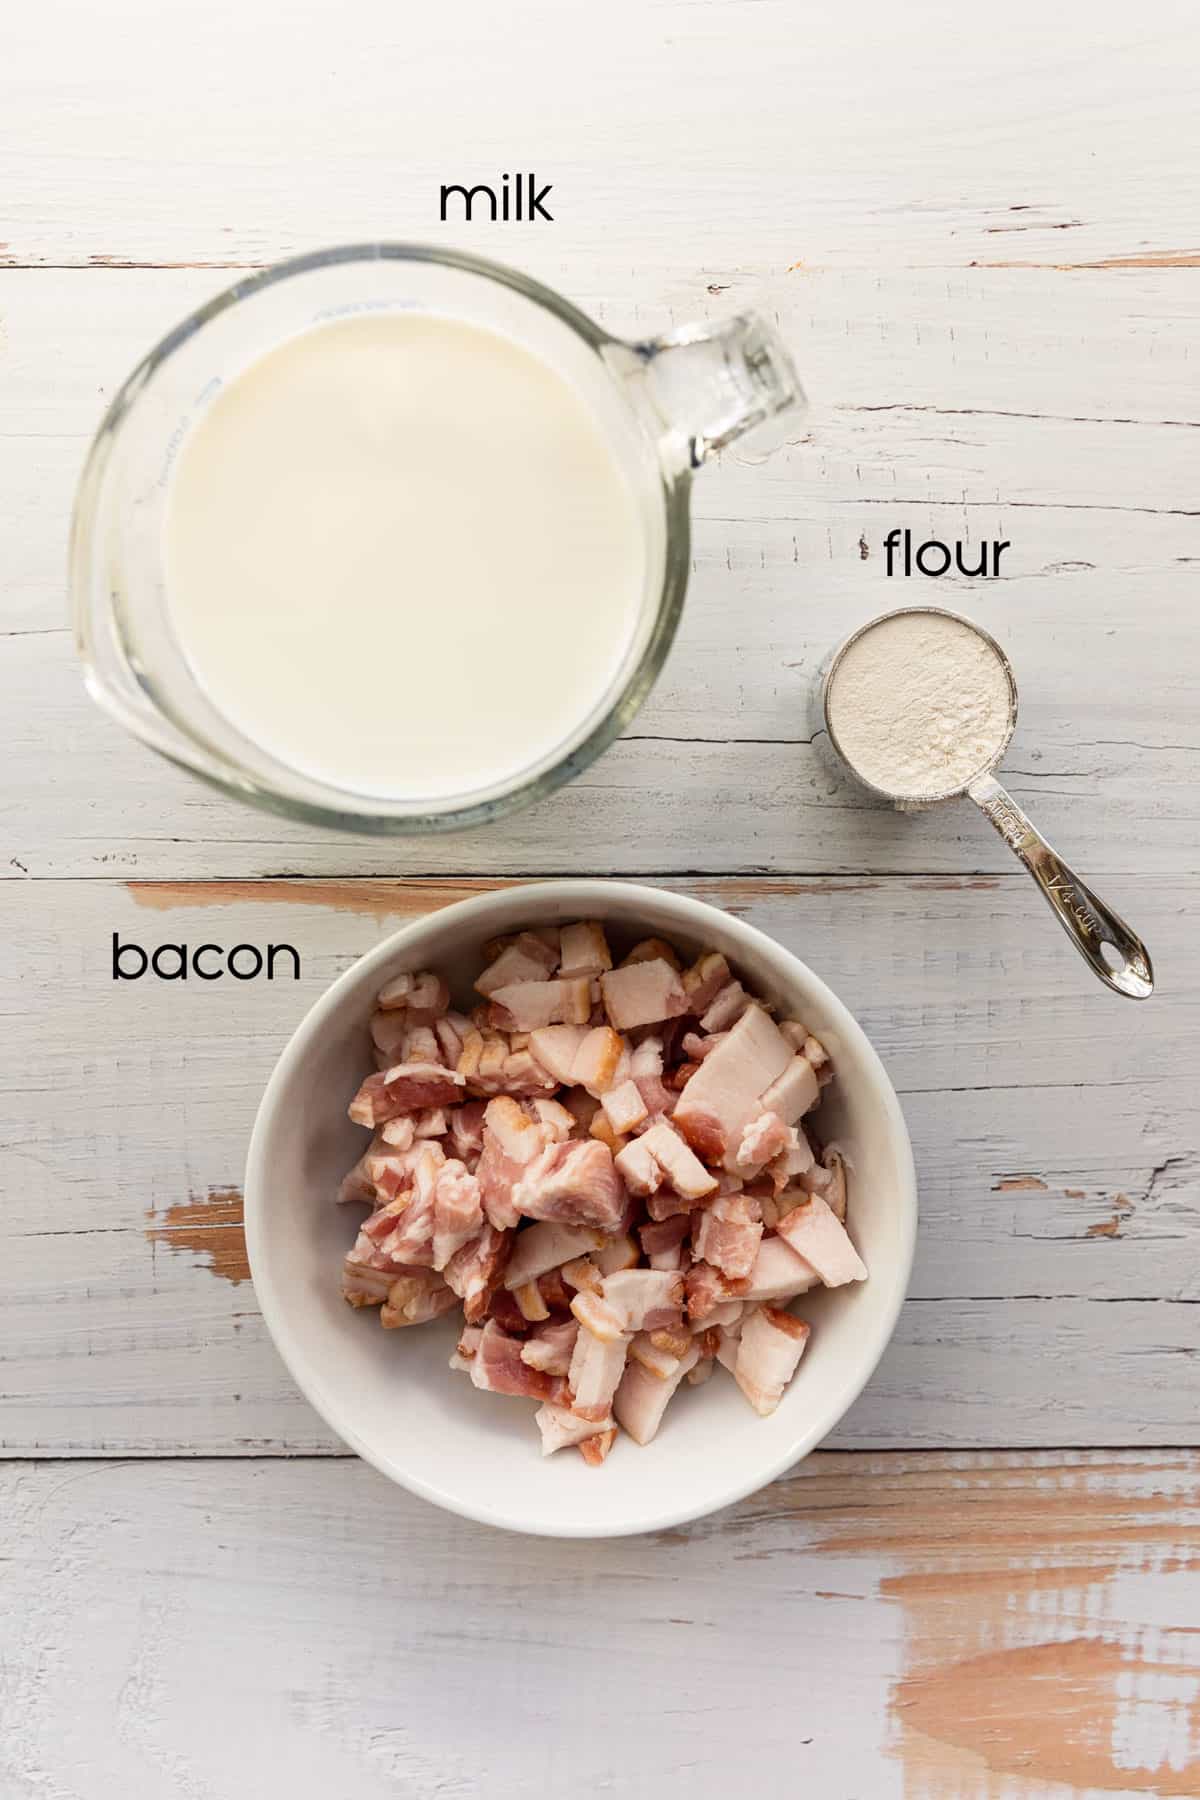 recipe ingredients like chopped bacon, milk, and flour